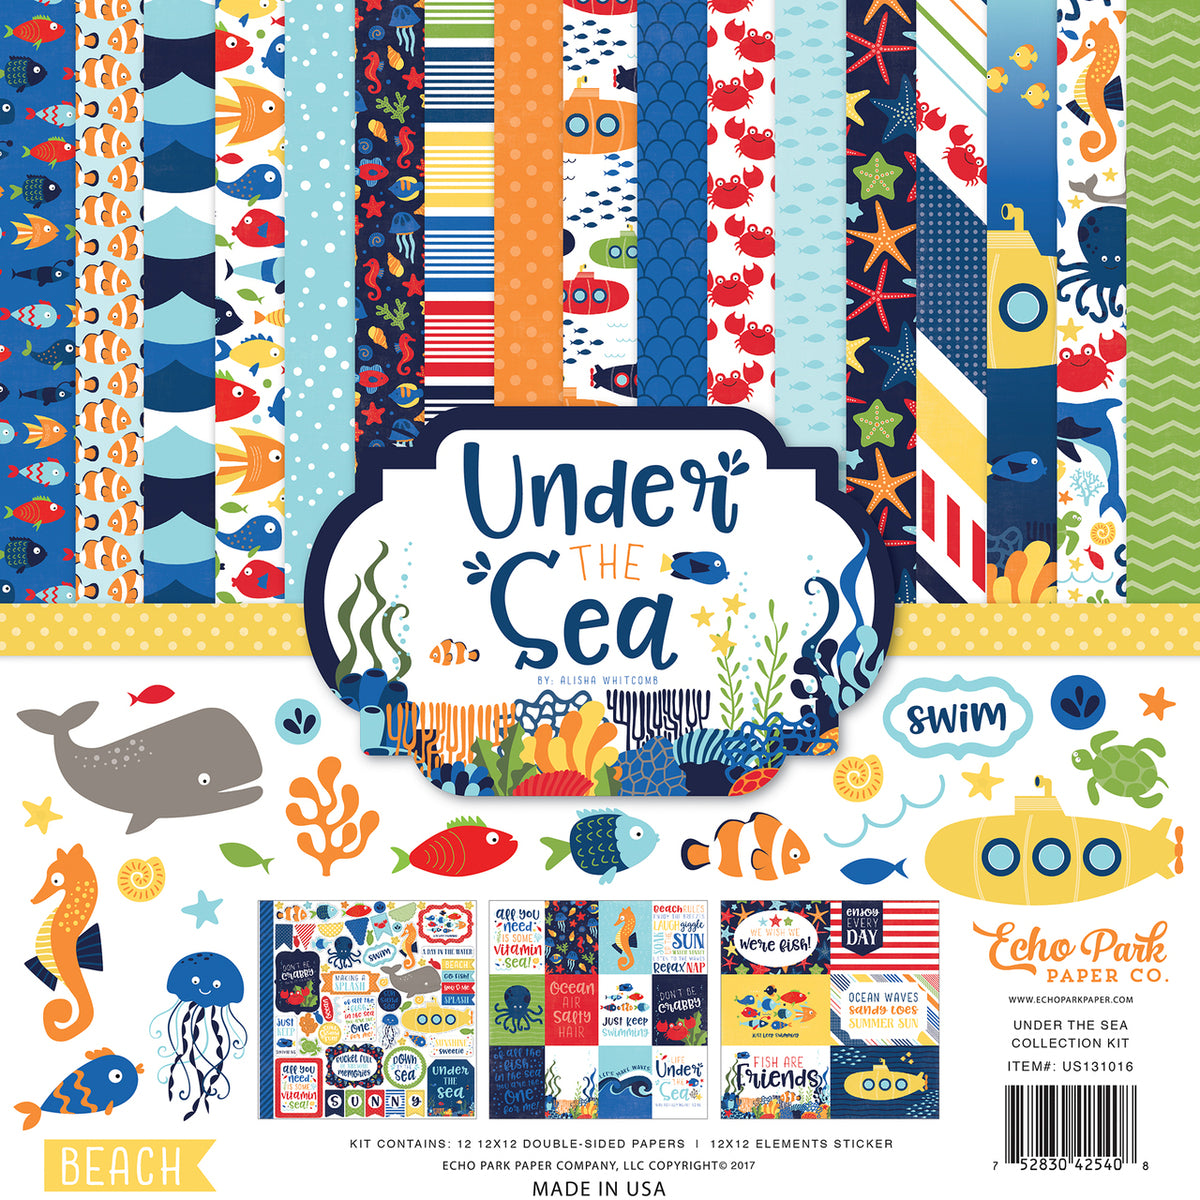 Under the Sea - 12x12 collection kit has 12 double-sided patterned papers with beach and sea theme by Echo Park Paper